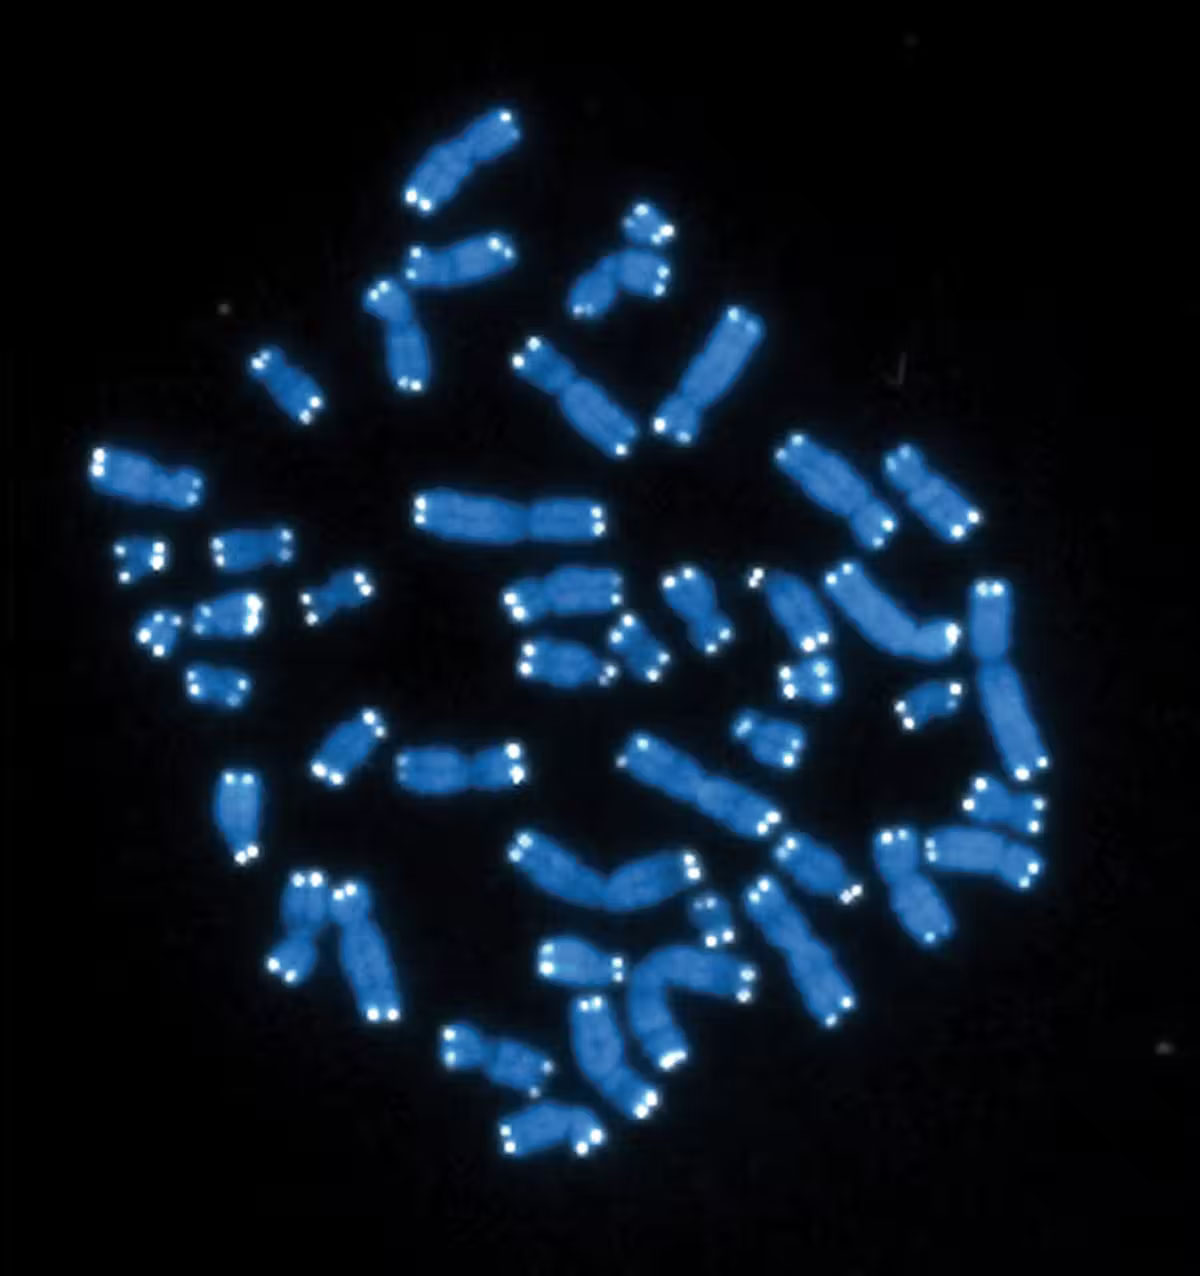 46 human chromosomes colored blue with white telomeres against a black screen